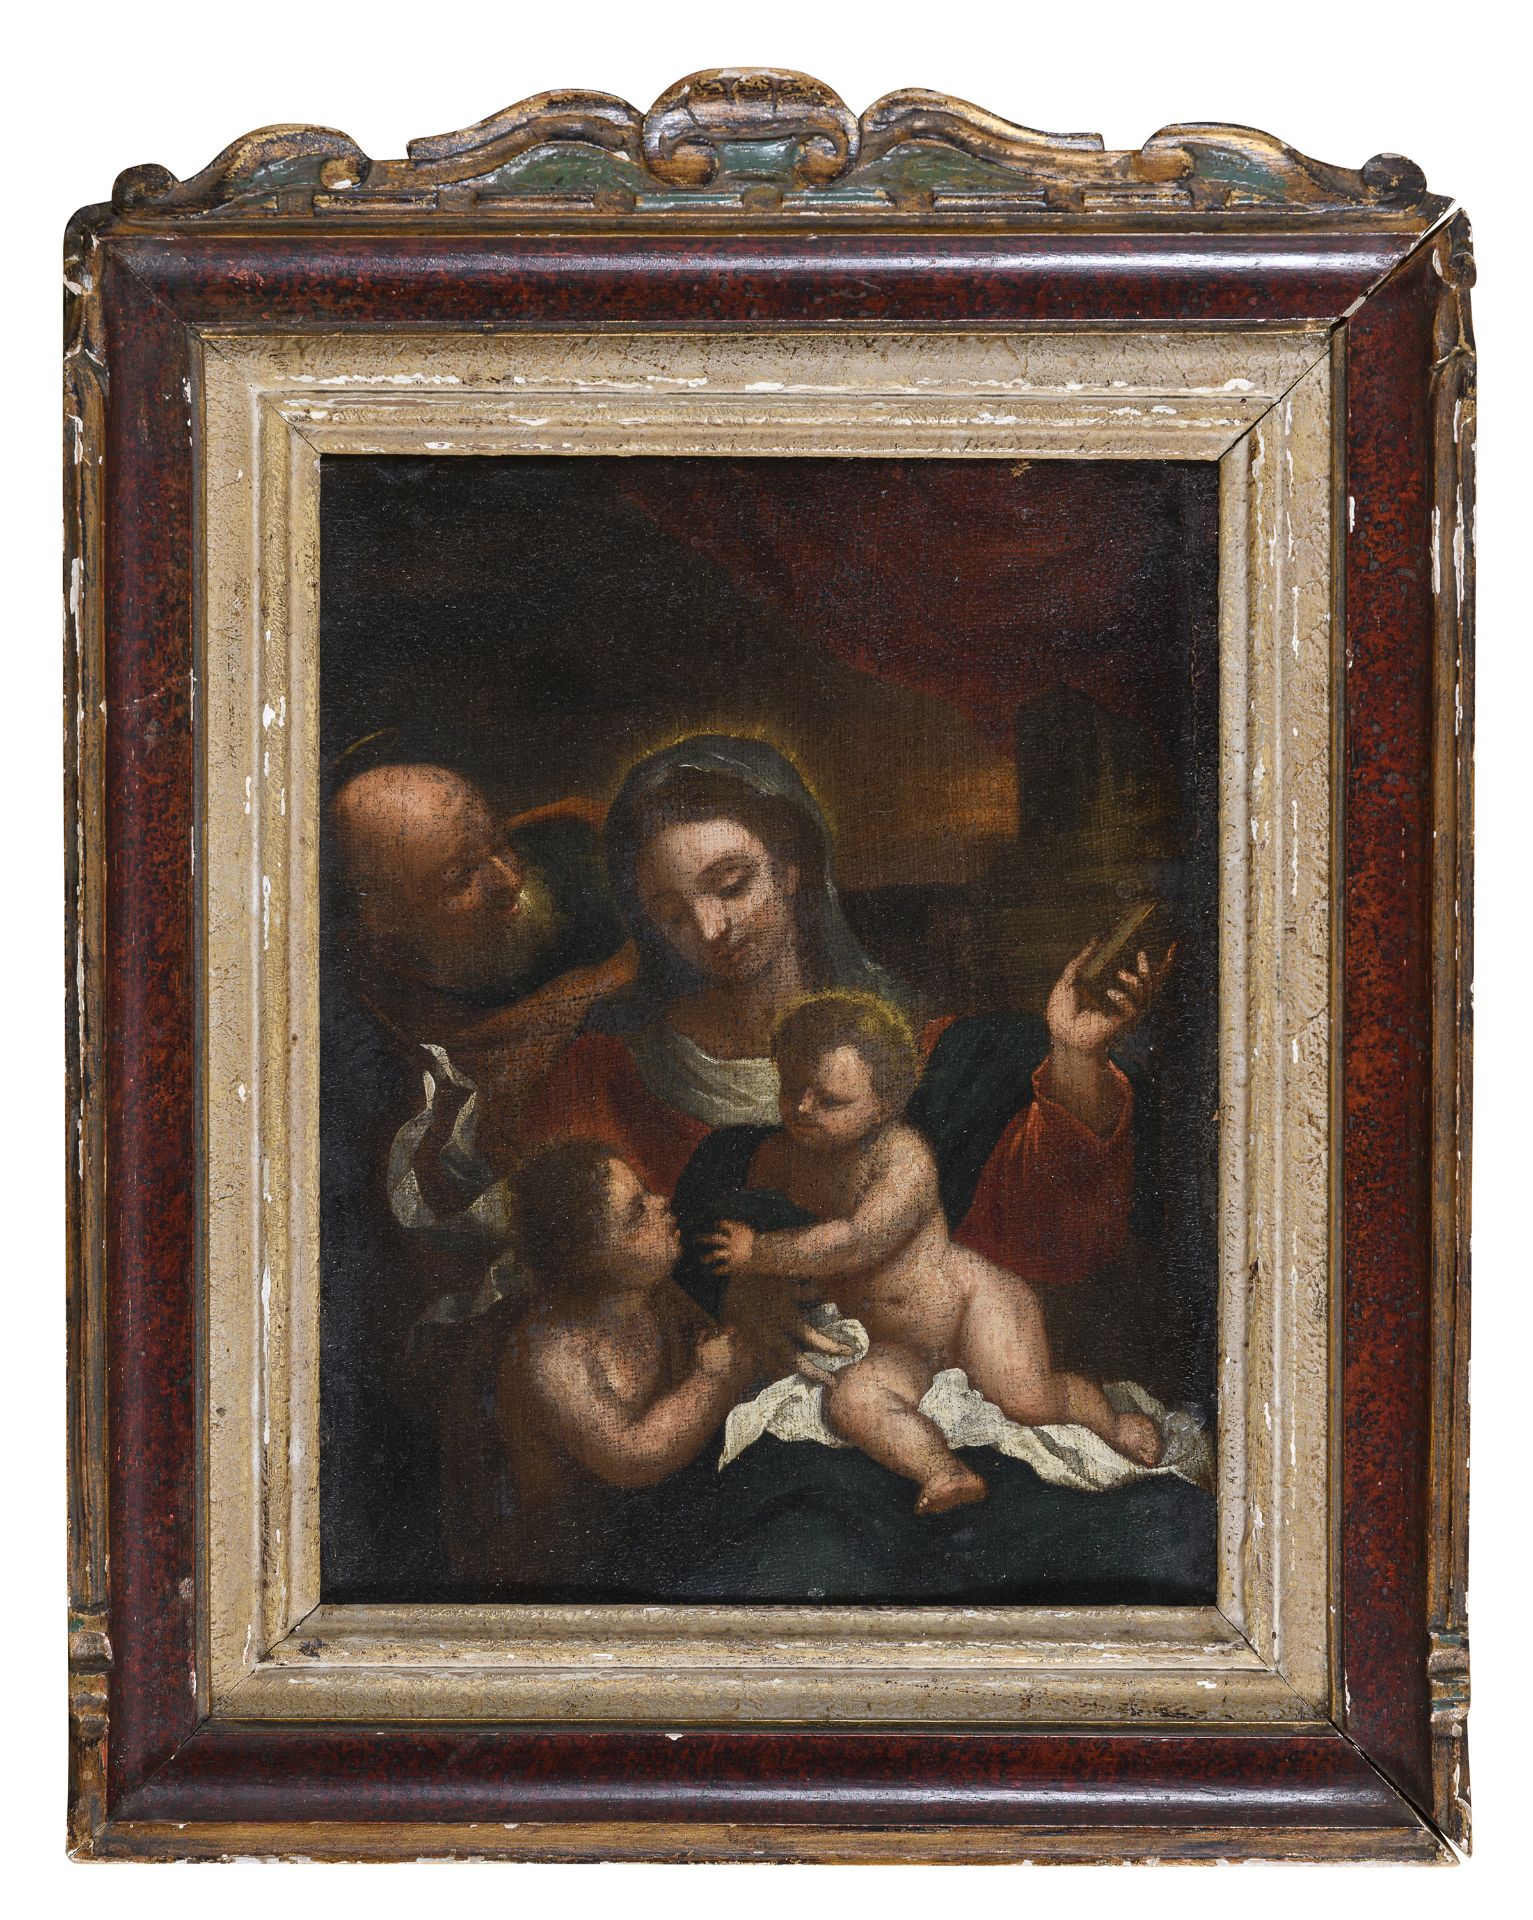 OIL PAINTING CENTRAL ITALY 18TH CENTURY